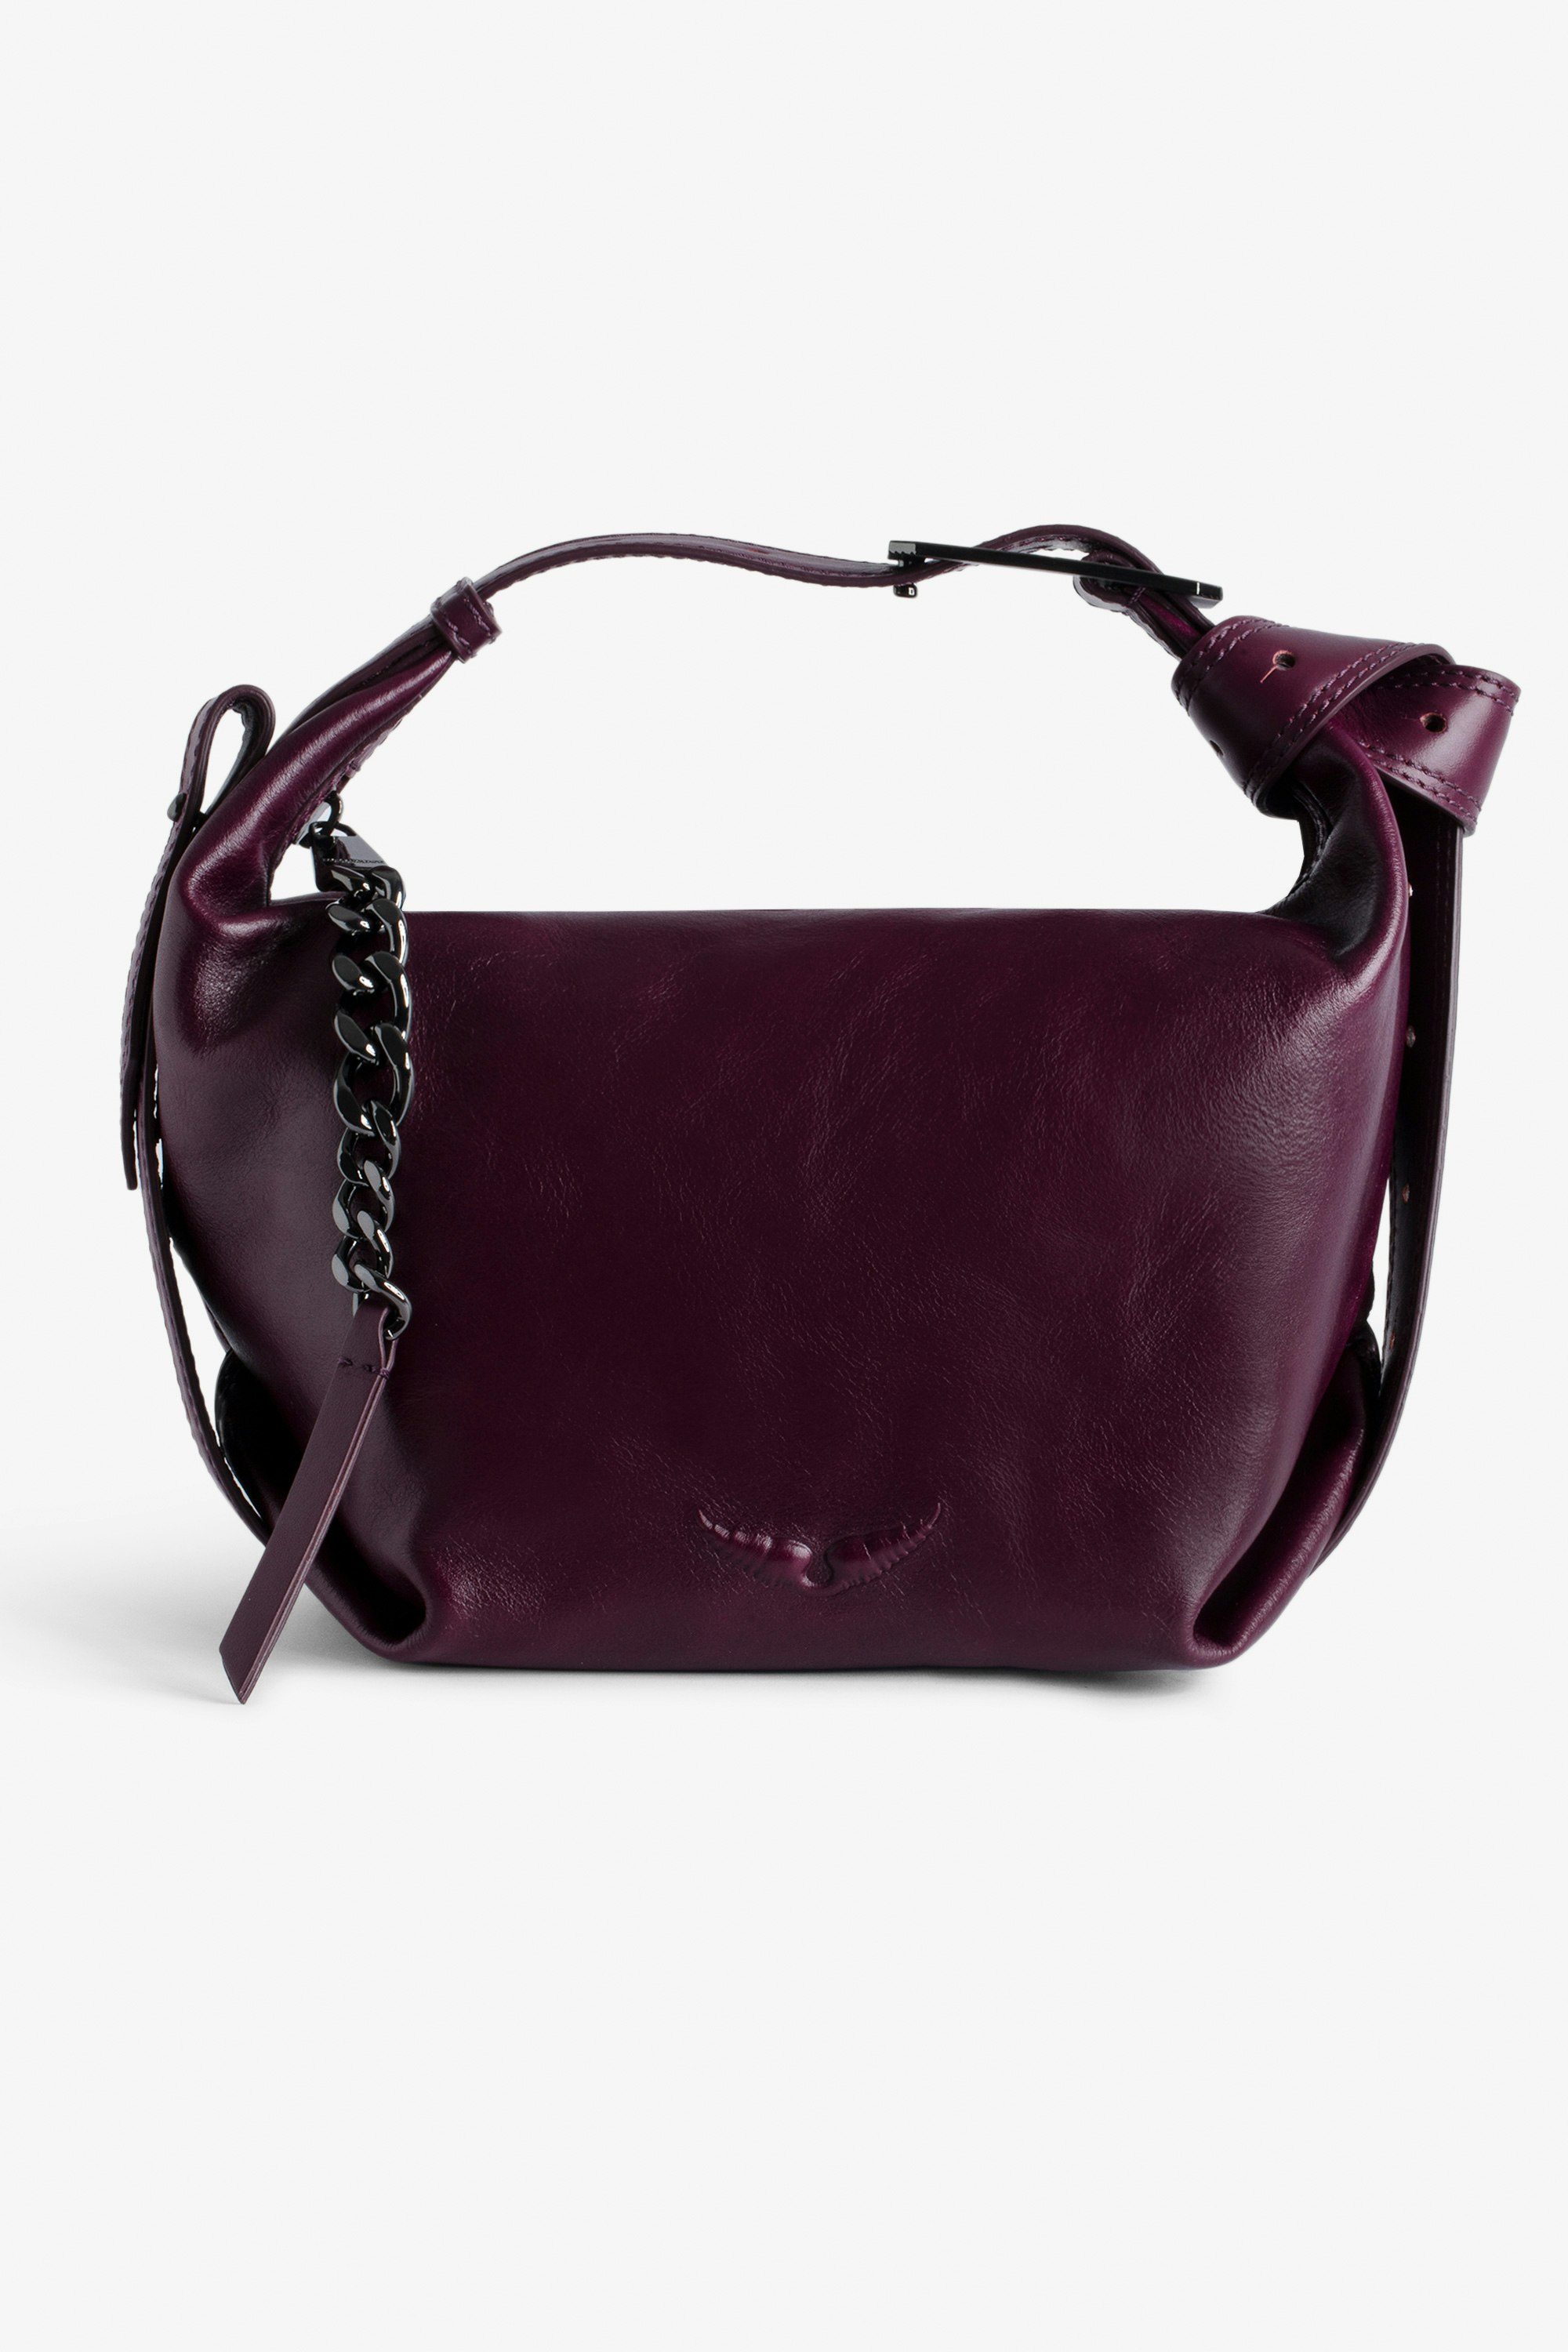 Sac Le Cecilia - Woman’s burgundy vegetable-tanned leather bag with shoulder strap and metal C buckle